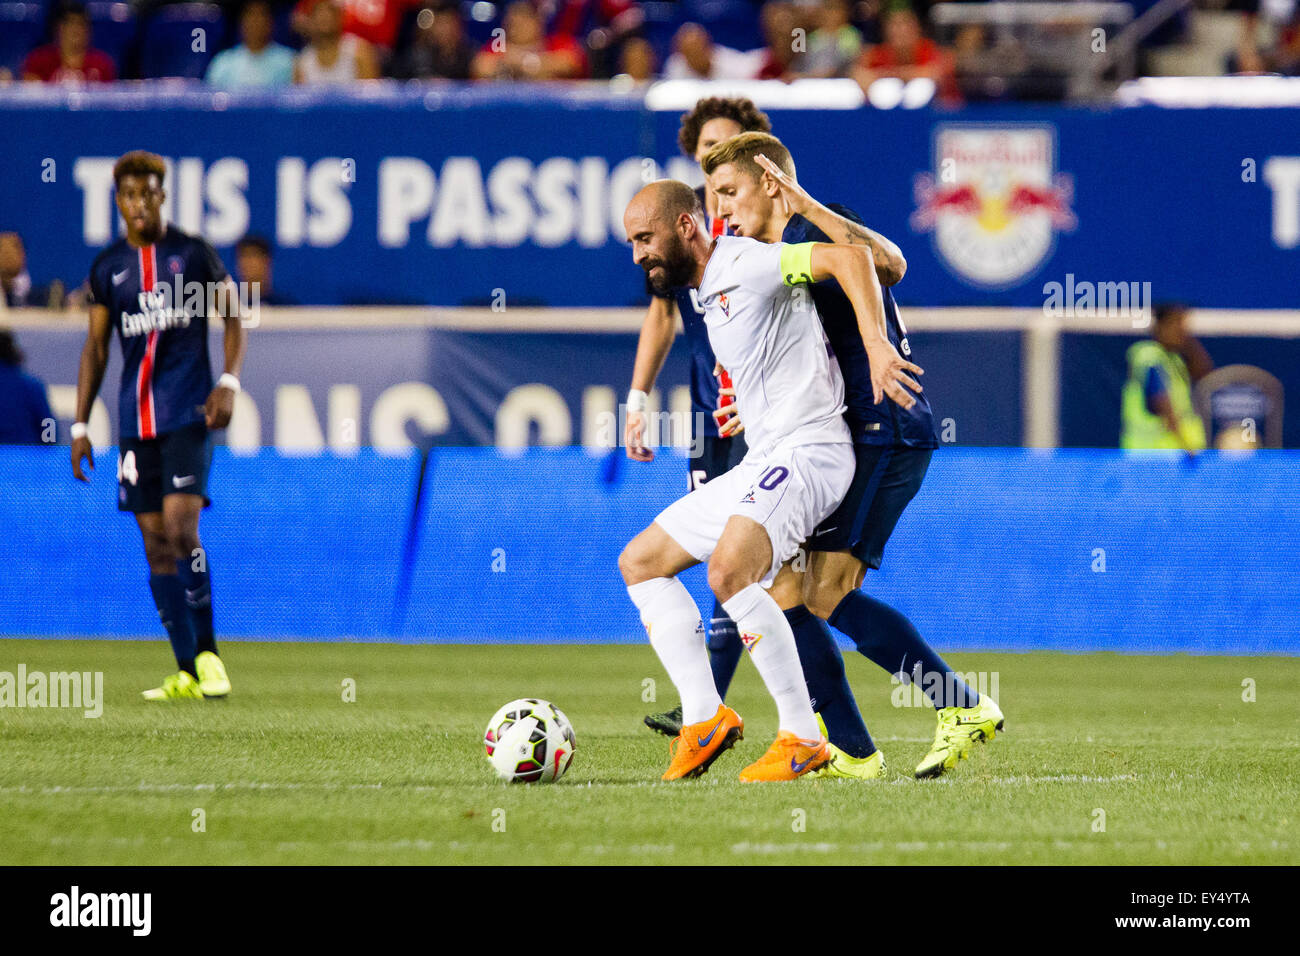 July 21, 2015: Fiorentina midfielder Alberto Aquilani #10 works the ball in front of Paris Saint-Germain defender Lucas Digne #21 during the International Champions Cup featuring Paris Saint-Germain versus Fiorentina (AFC) at Red Bull Arena in Harrison, NJ. Stock Photo